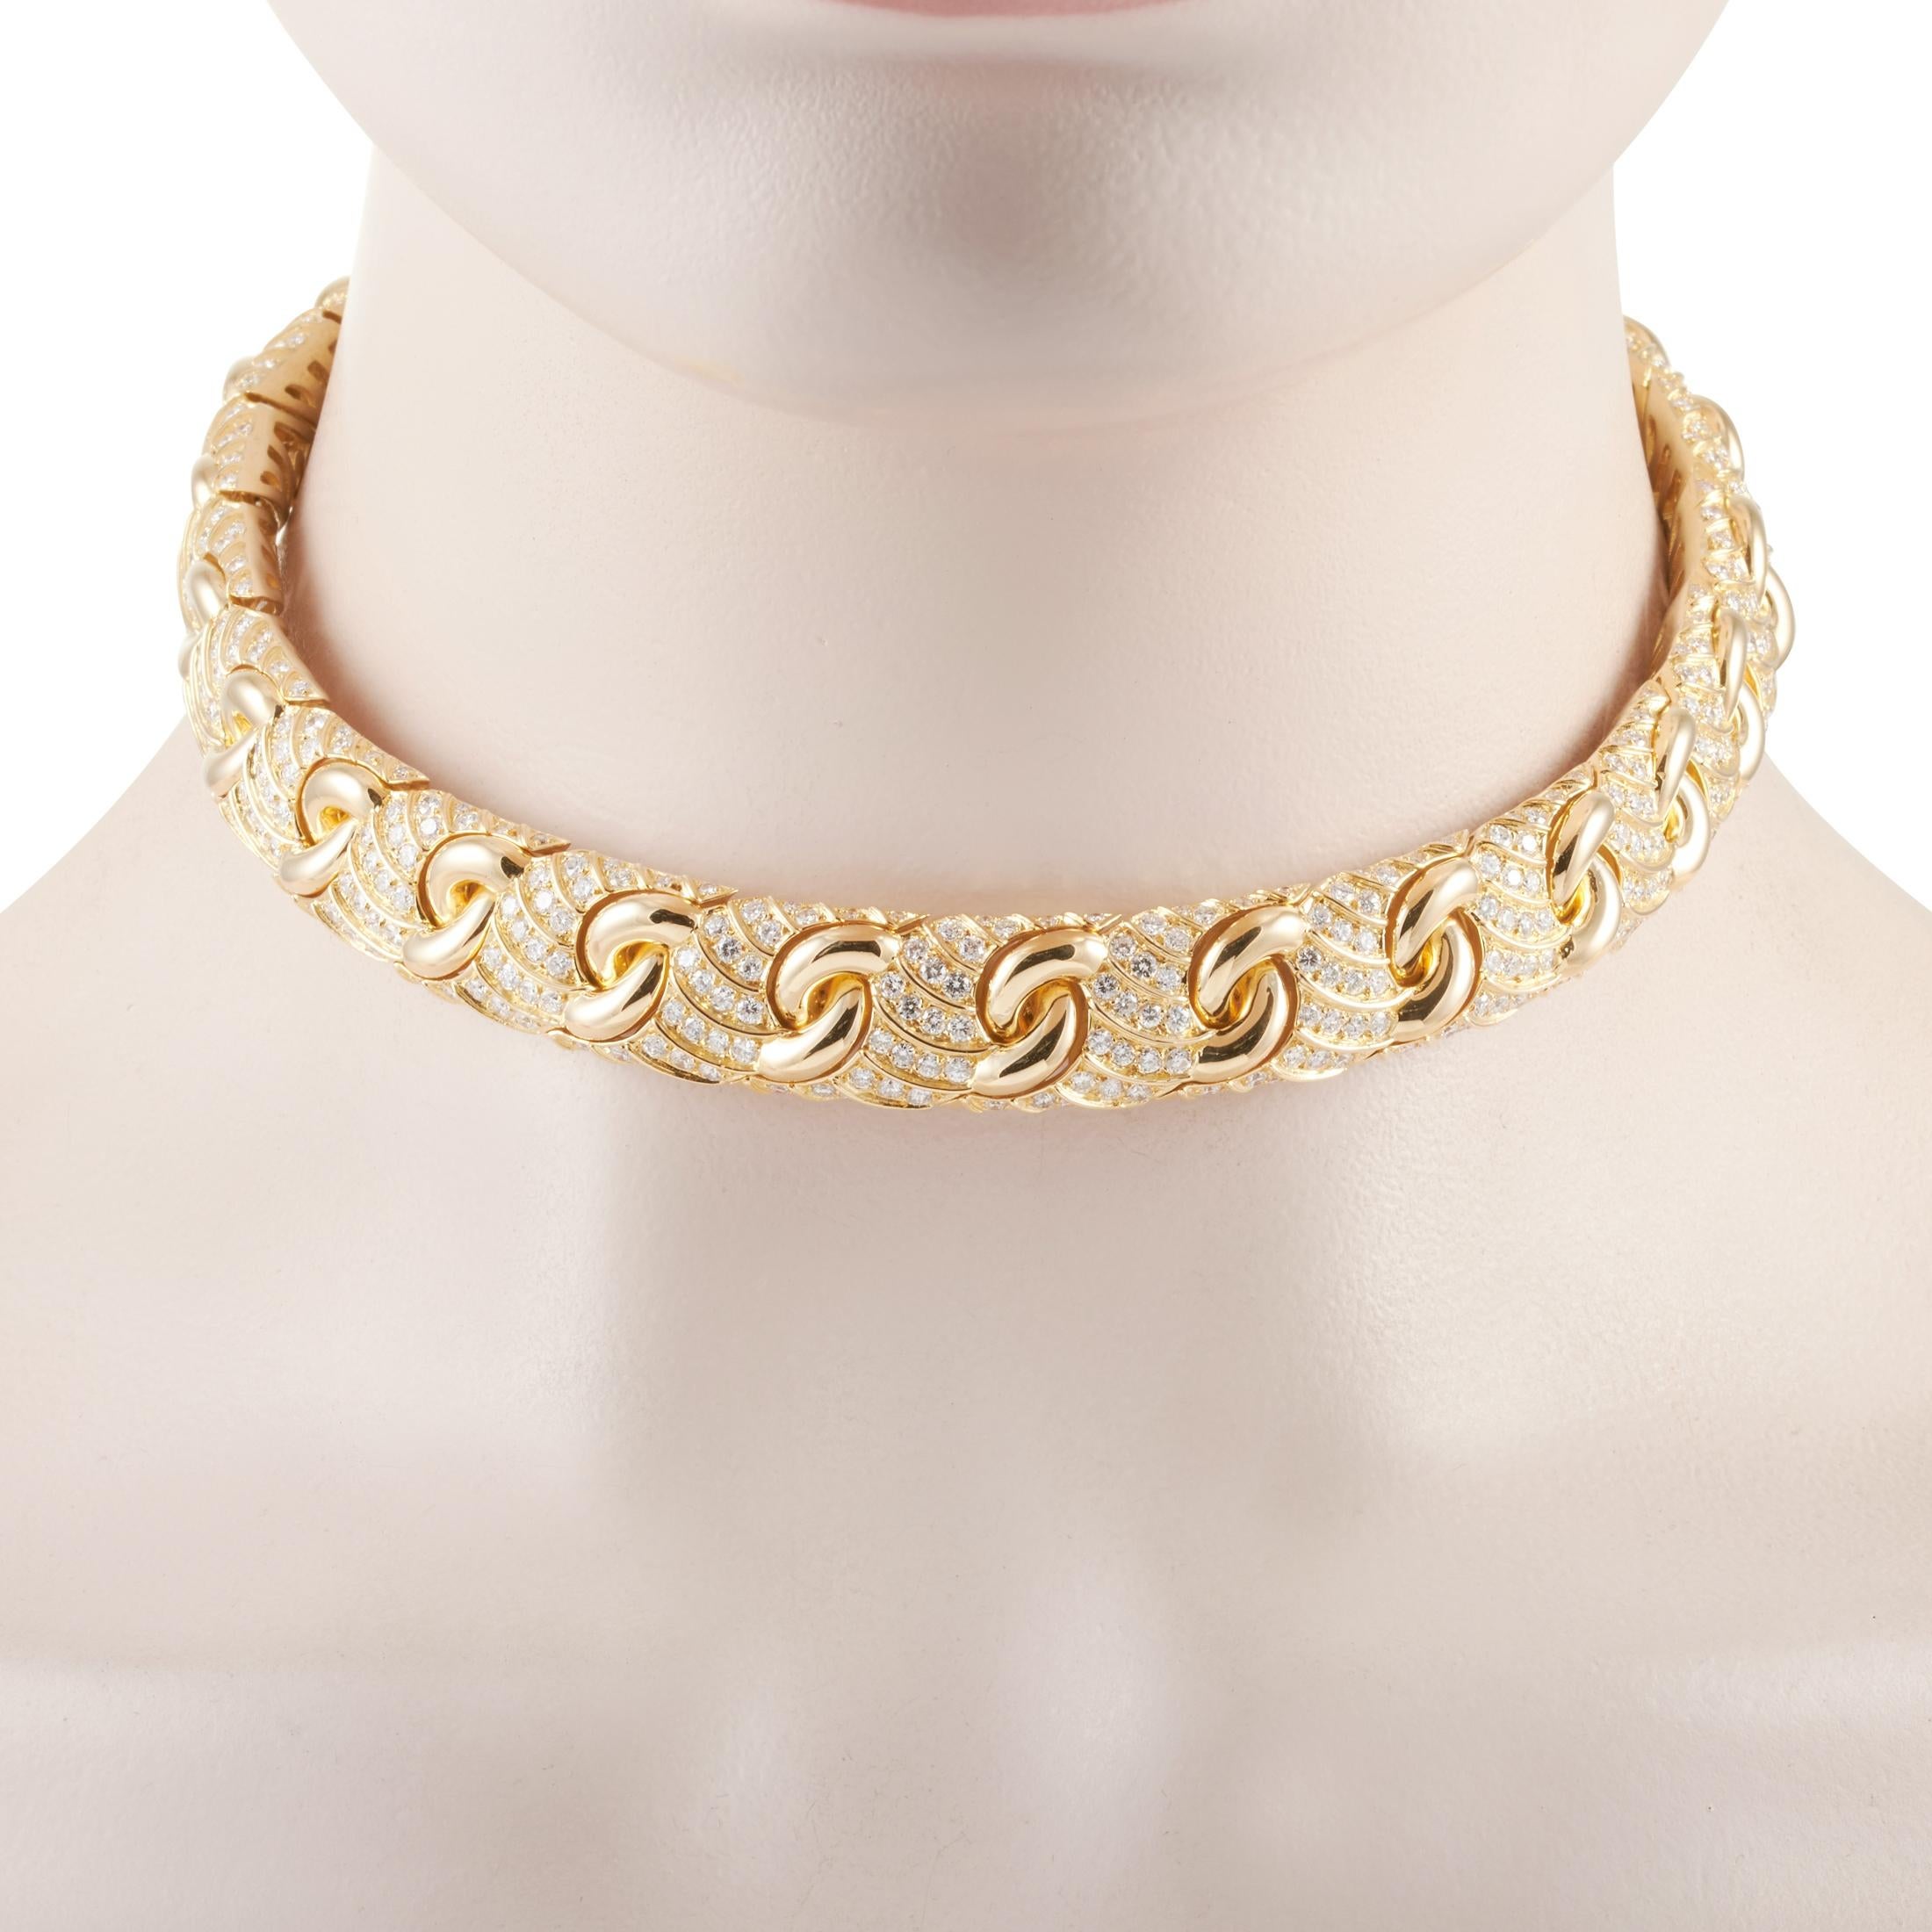 This Bvlgari necklace is made of 18K yellow gold and embellished with diamonds that boast F color and VS1 clarity and amount to approximately 15.00 carats. The necklace weighs 170.8 grams and measures 14.13” in length.

Offered in estate condition,